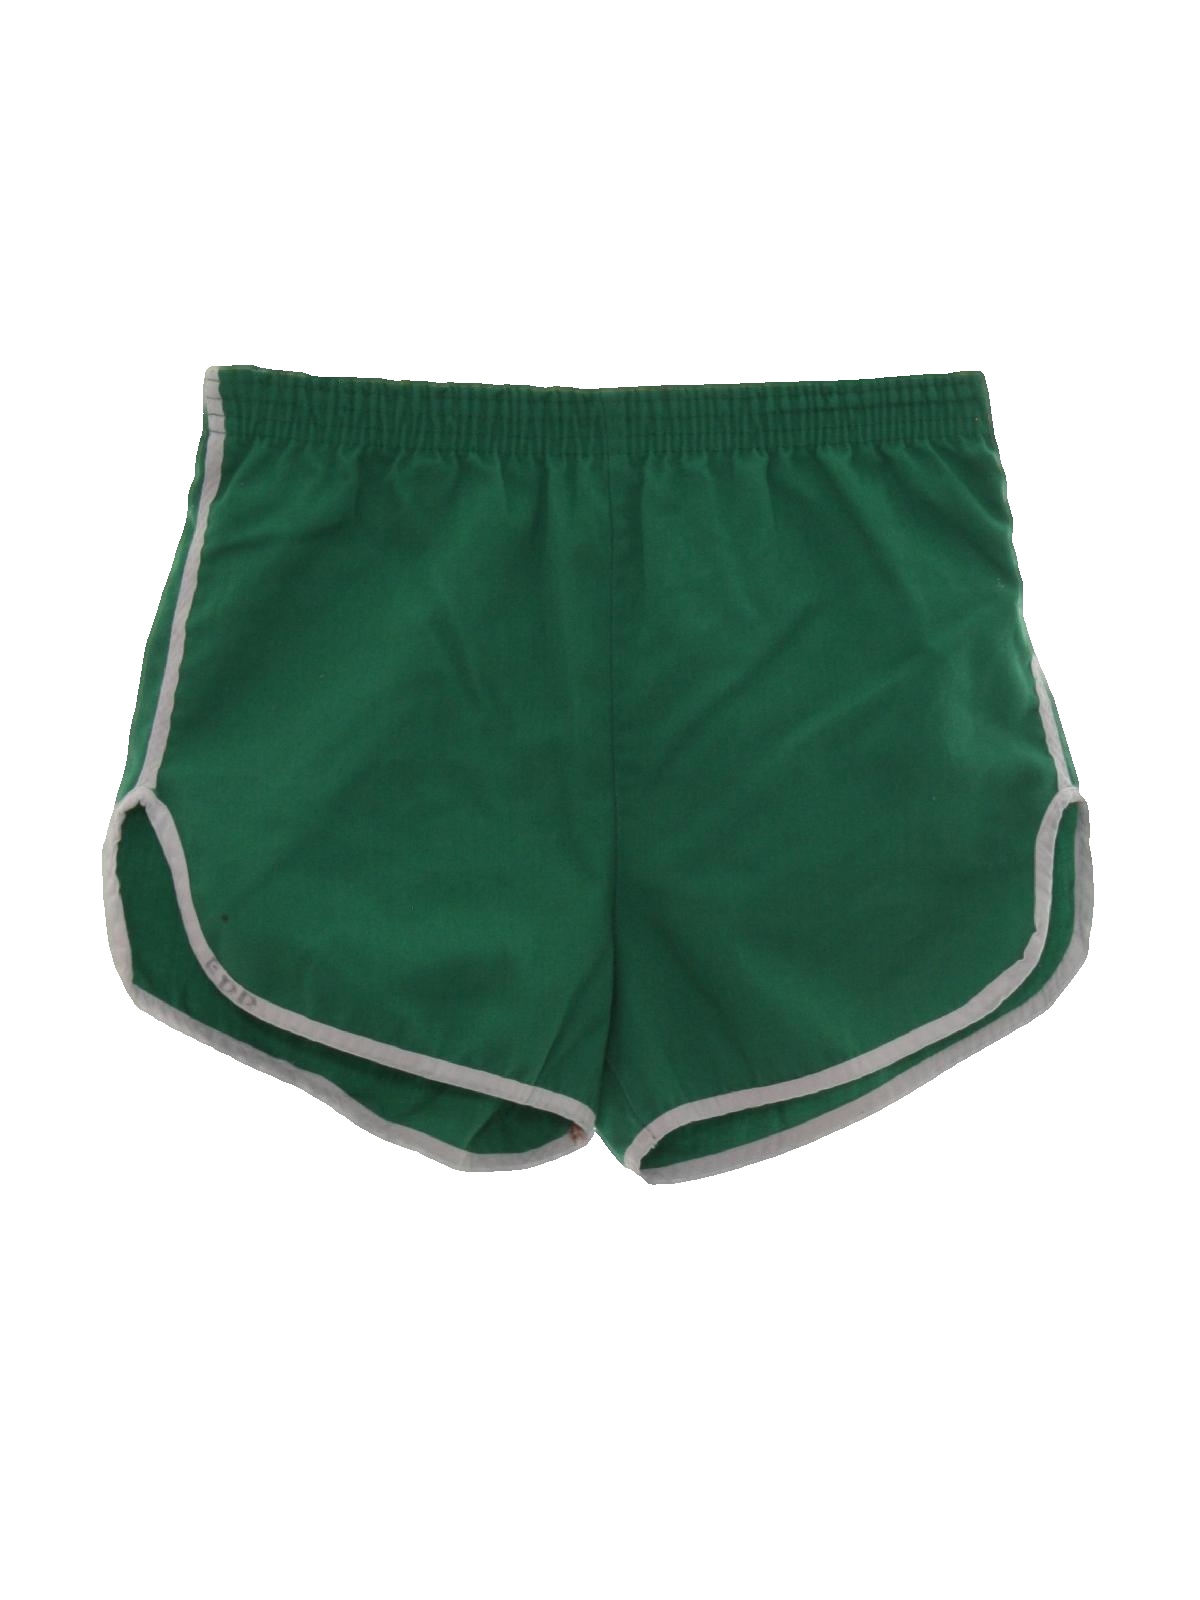 Retro 80's Shorts: 80s -Fabric Label- Mens kelly green polyester cotton ...